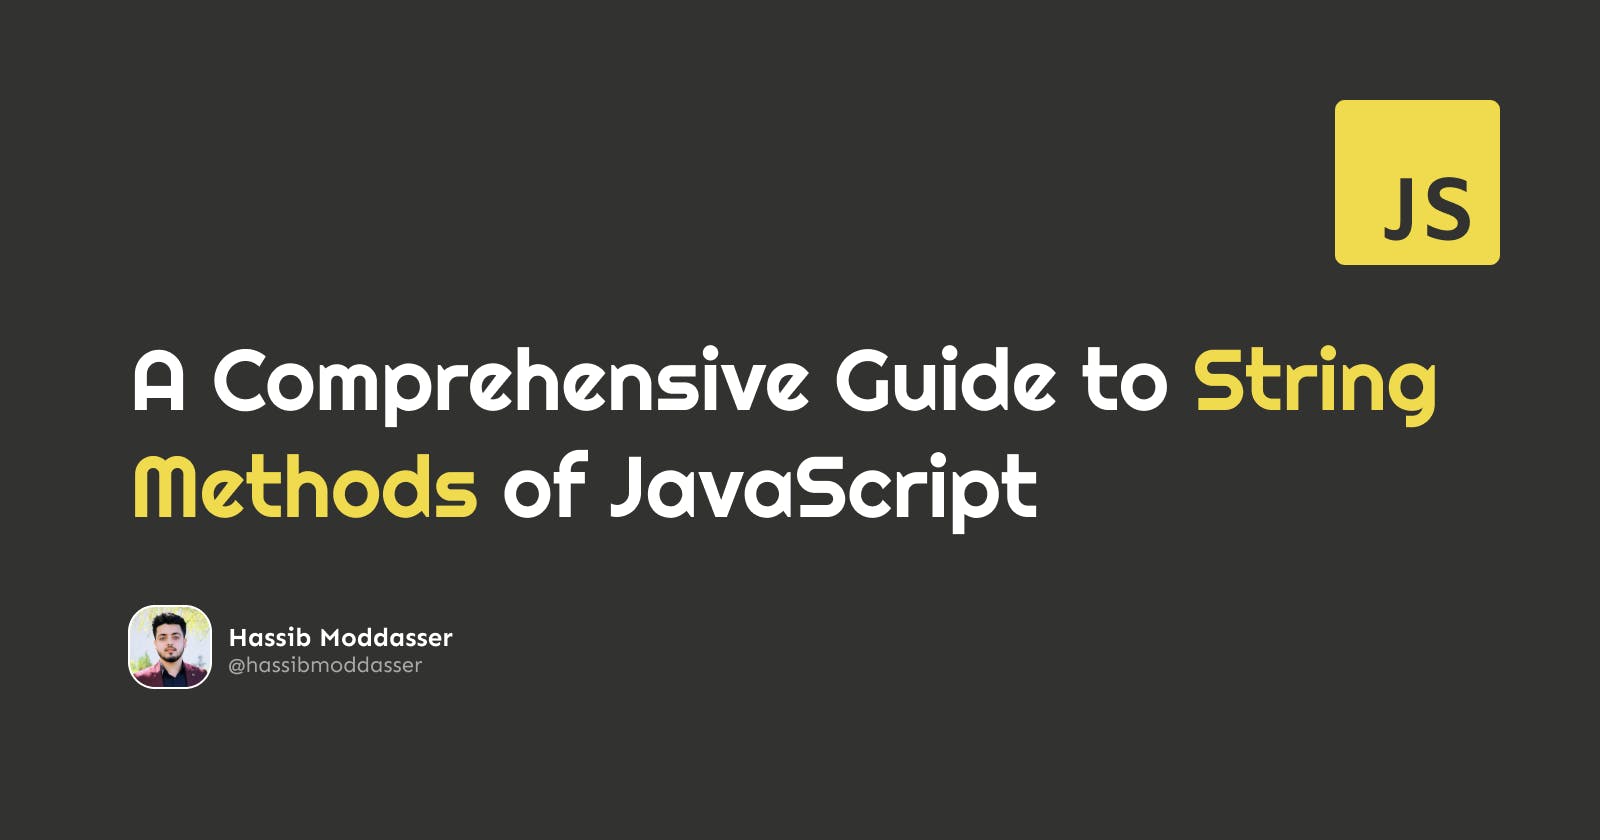 A Comprehensive Guide to String Methods of JavaScript